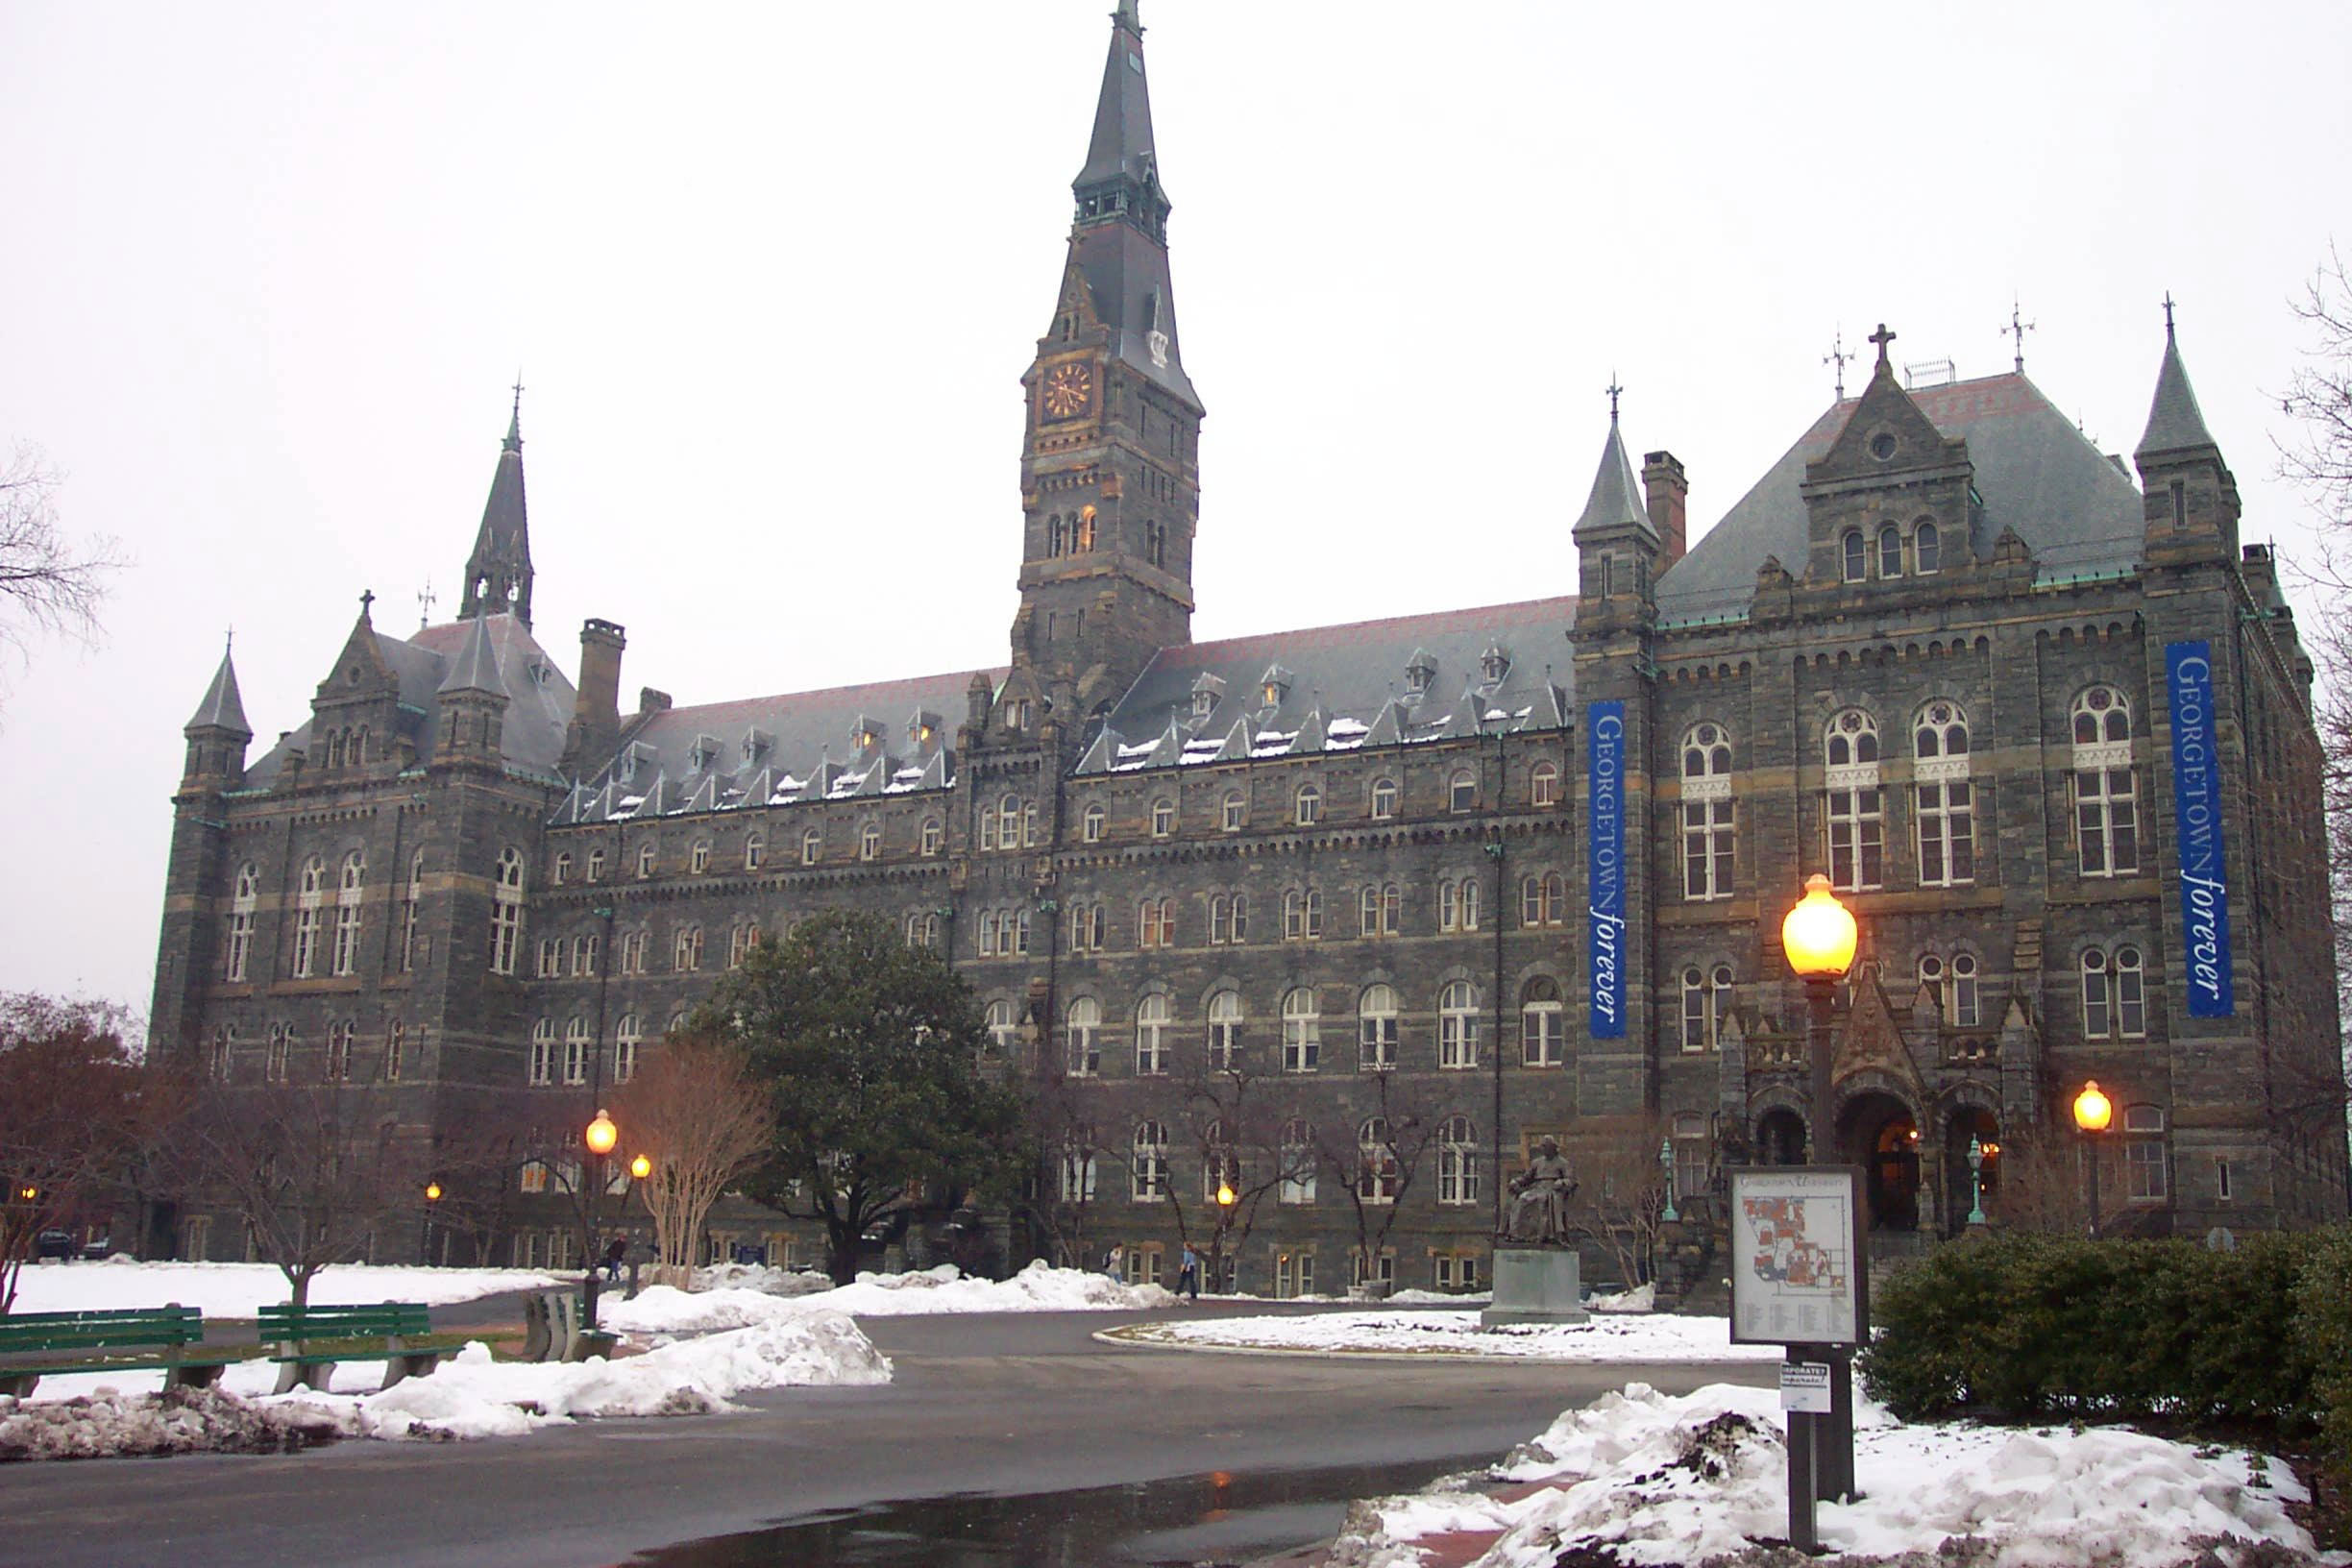 Georgetown University Students Busted For Running A Suspected Drug Lab